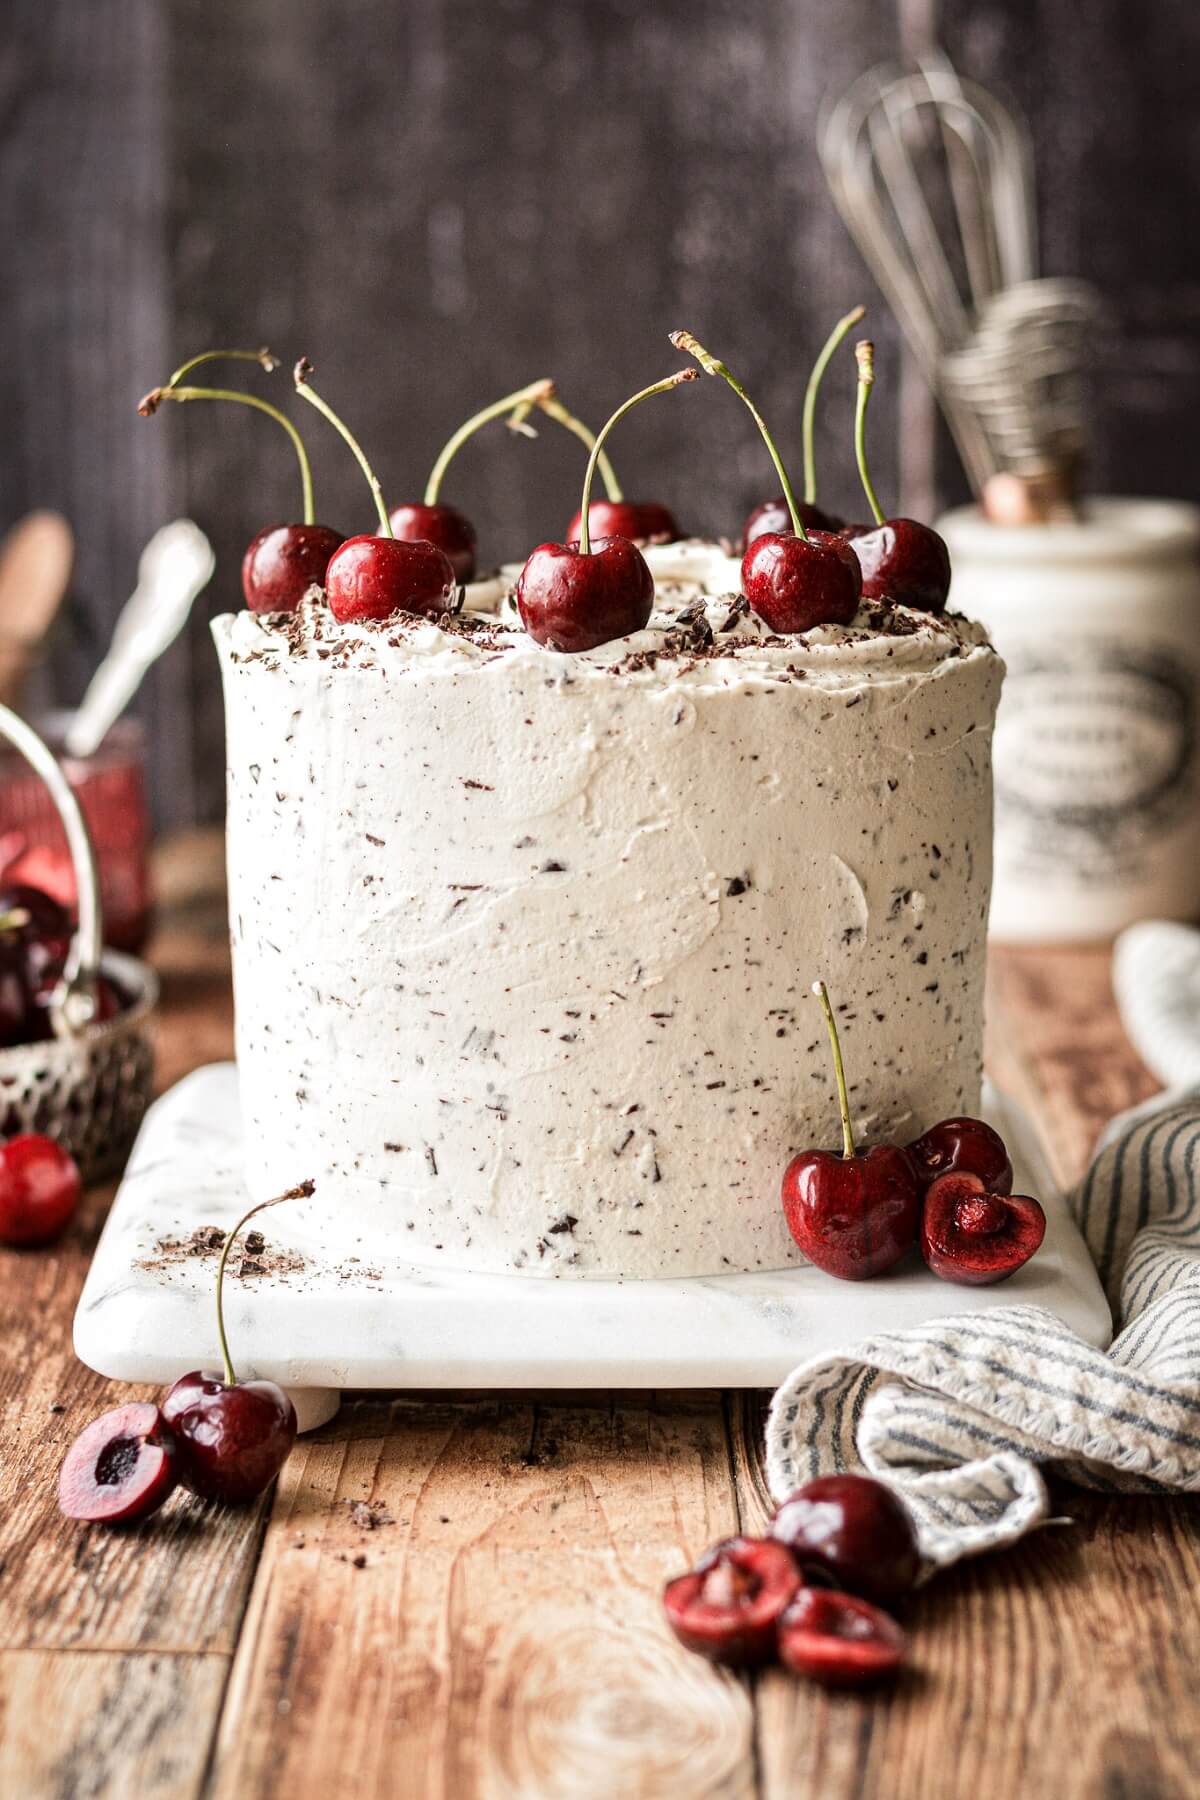 White forest cake with chocolate chip whipped cream frosting and cherries on top.